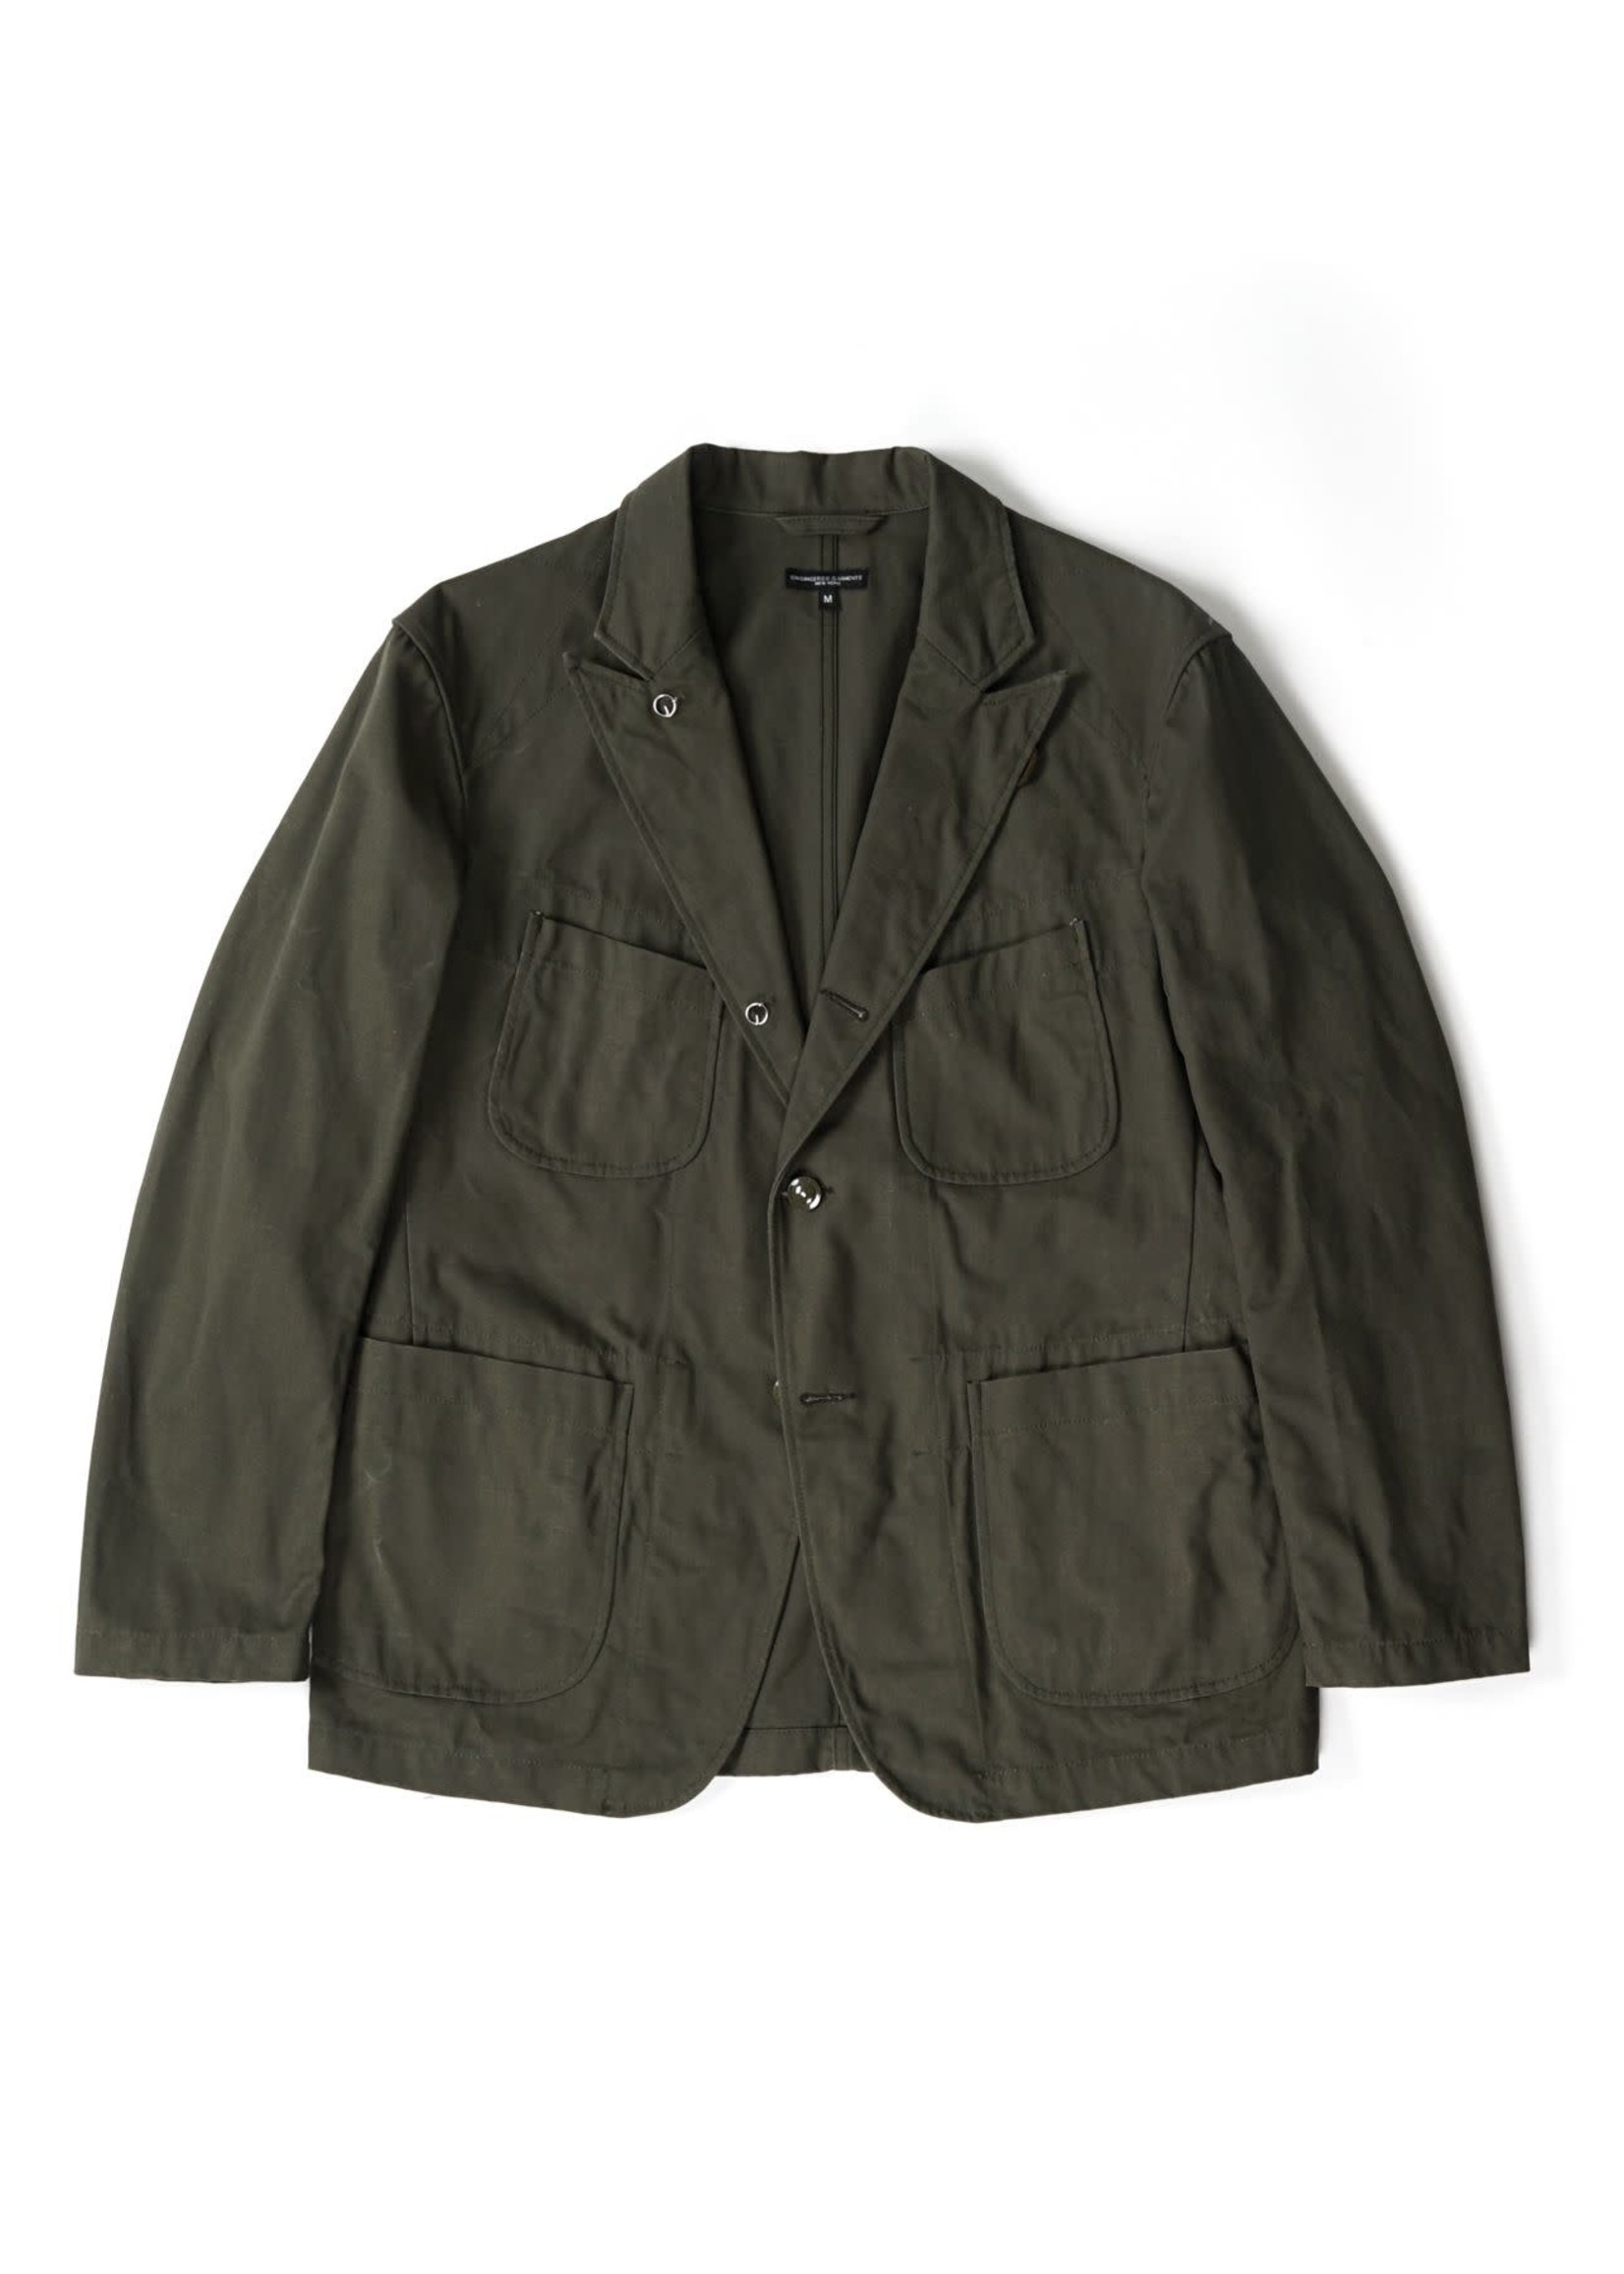 Engineered Garments Engineered Garments Bedford Jacket Olive Heavy Weight Cotton Ripstop